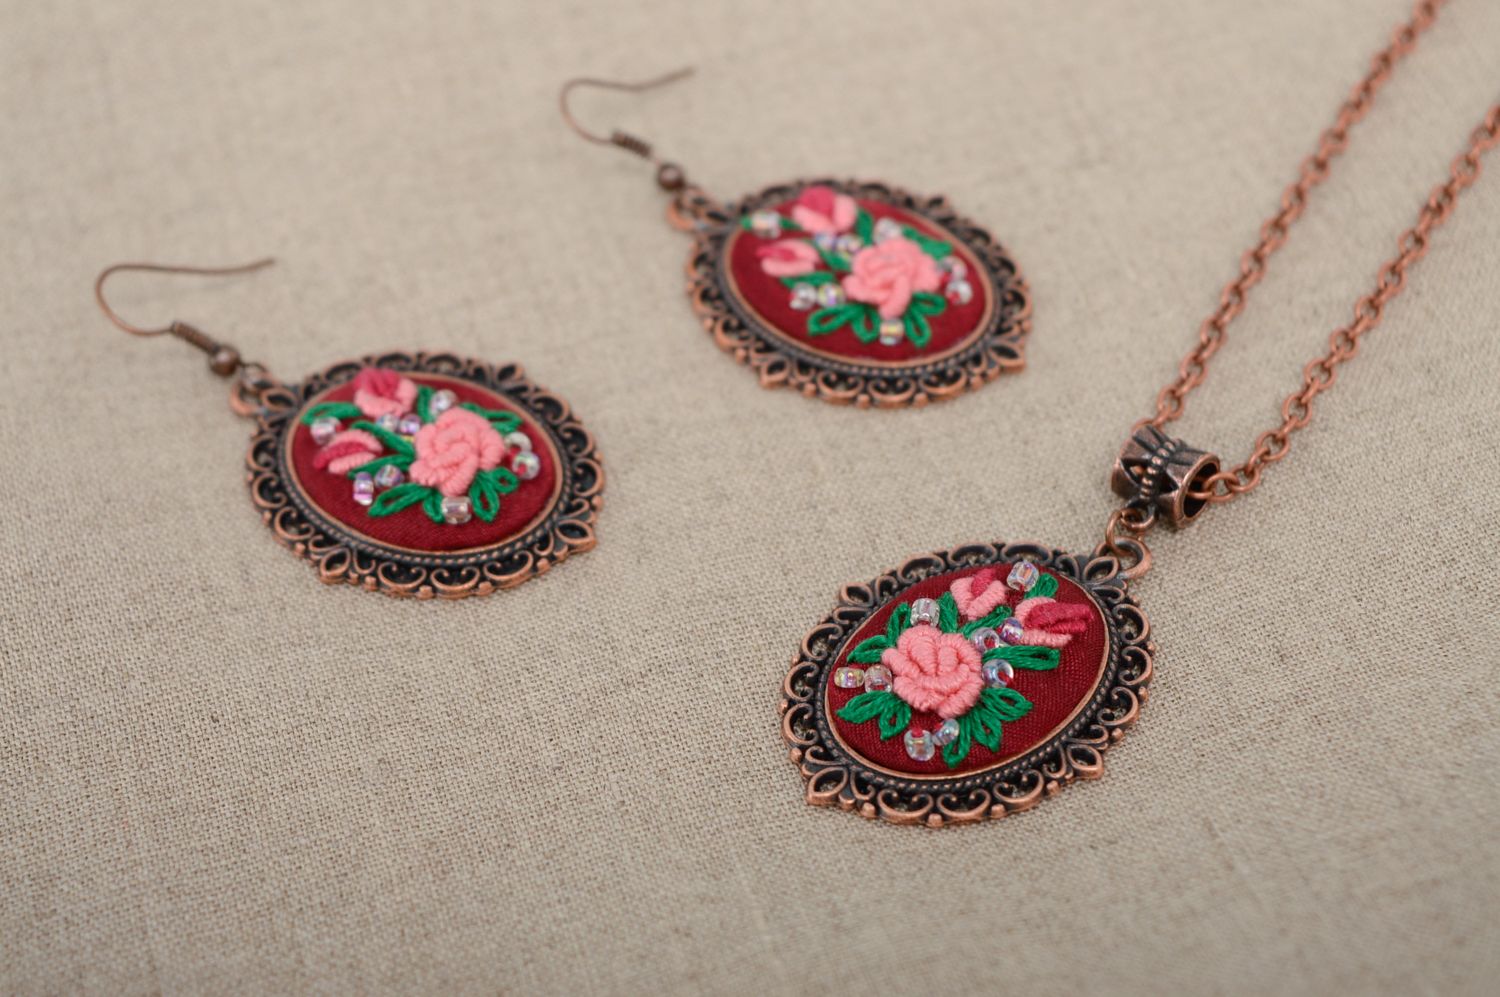 Rococo embroidered earrings and pendant in vintage style photo 1